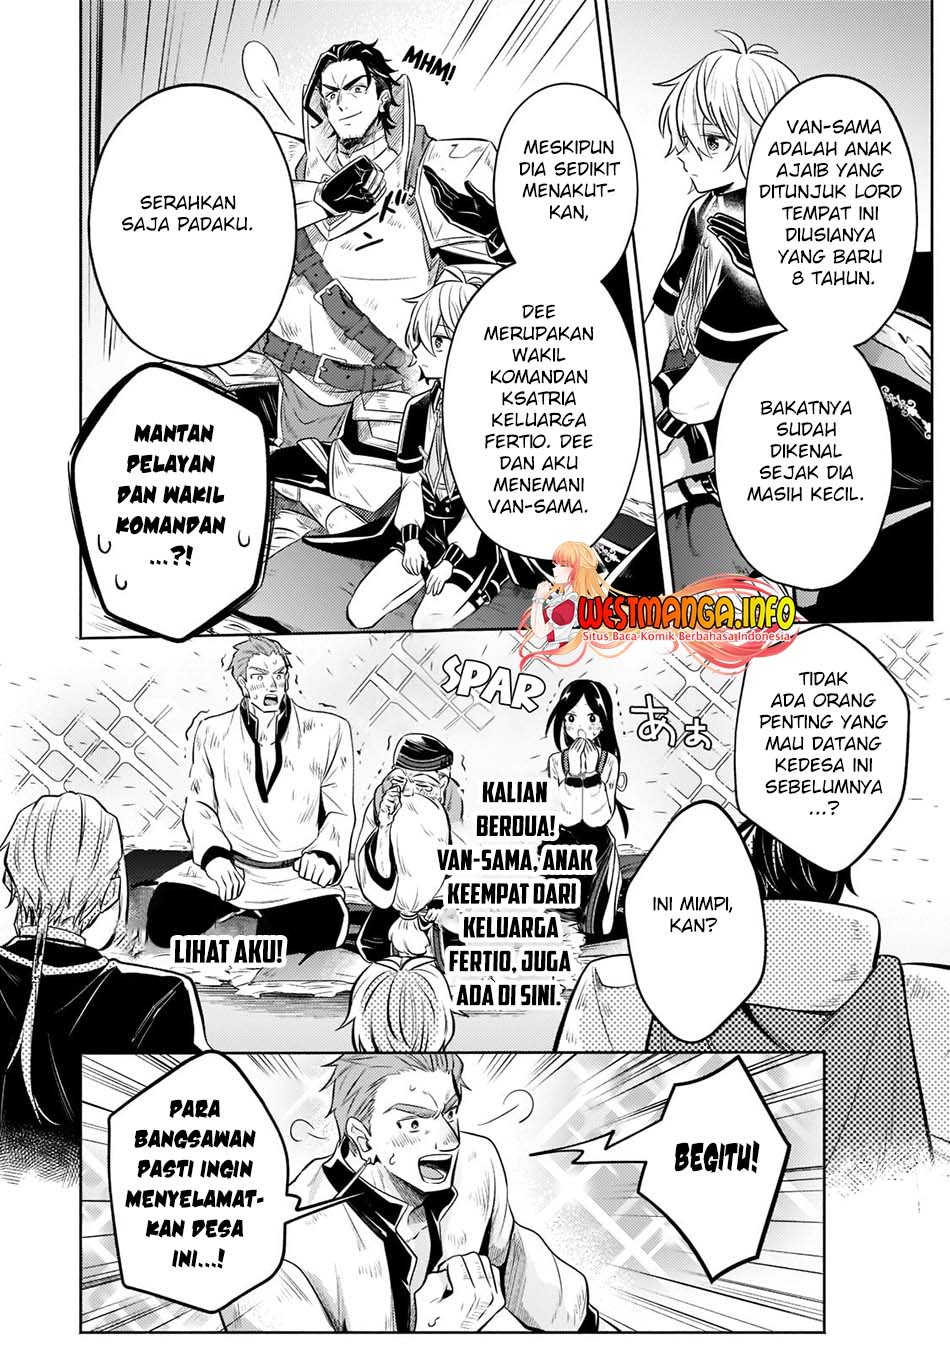 Fun Territory Defense Of The Easy-going Lord ~the Nameless Village Is Made Into The Strongest Fortified City By Production Magic~ Chapter 7